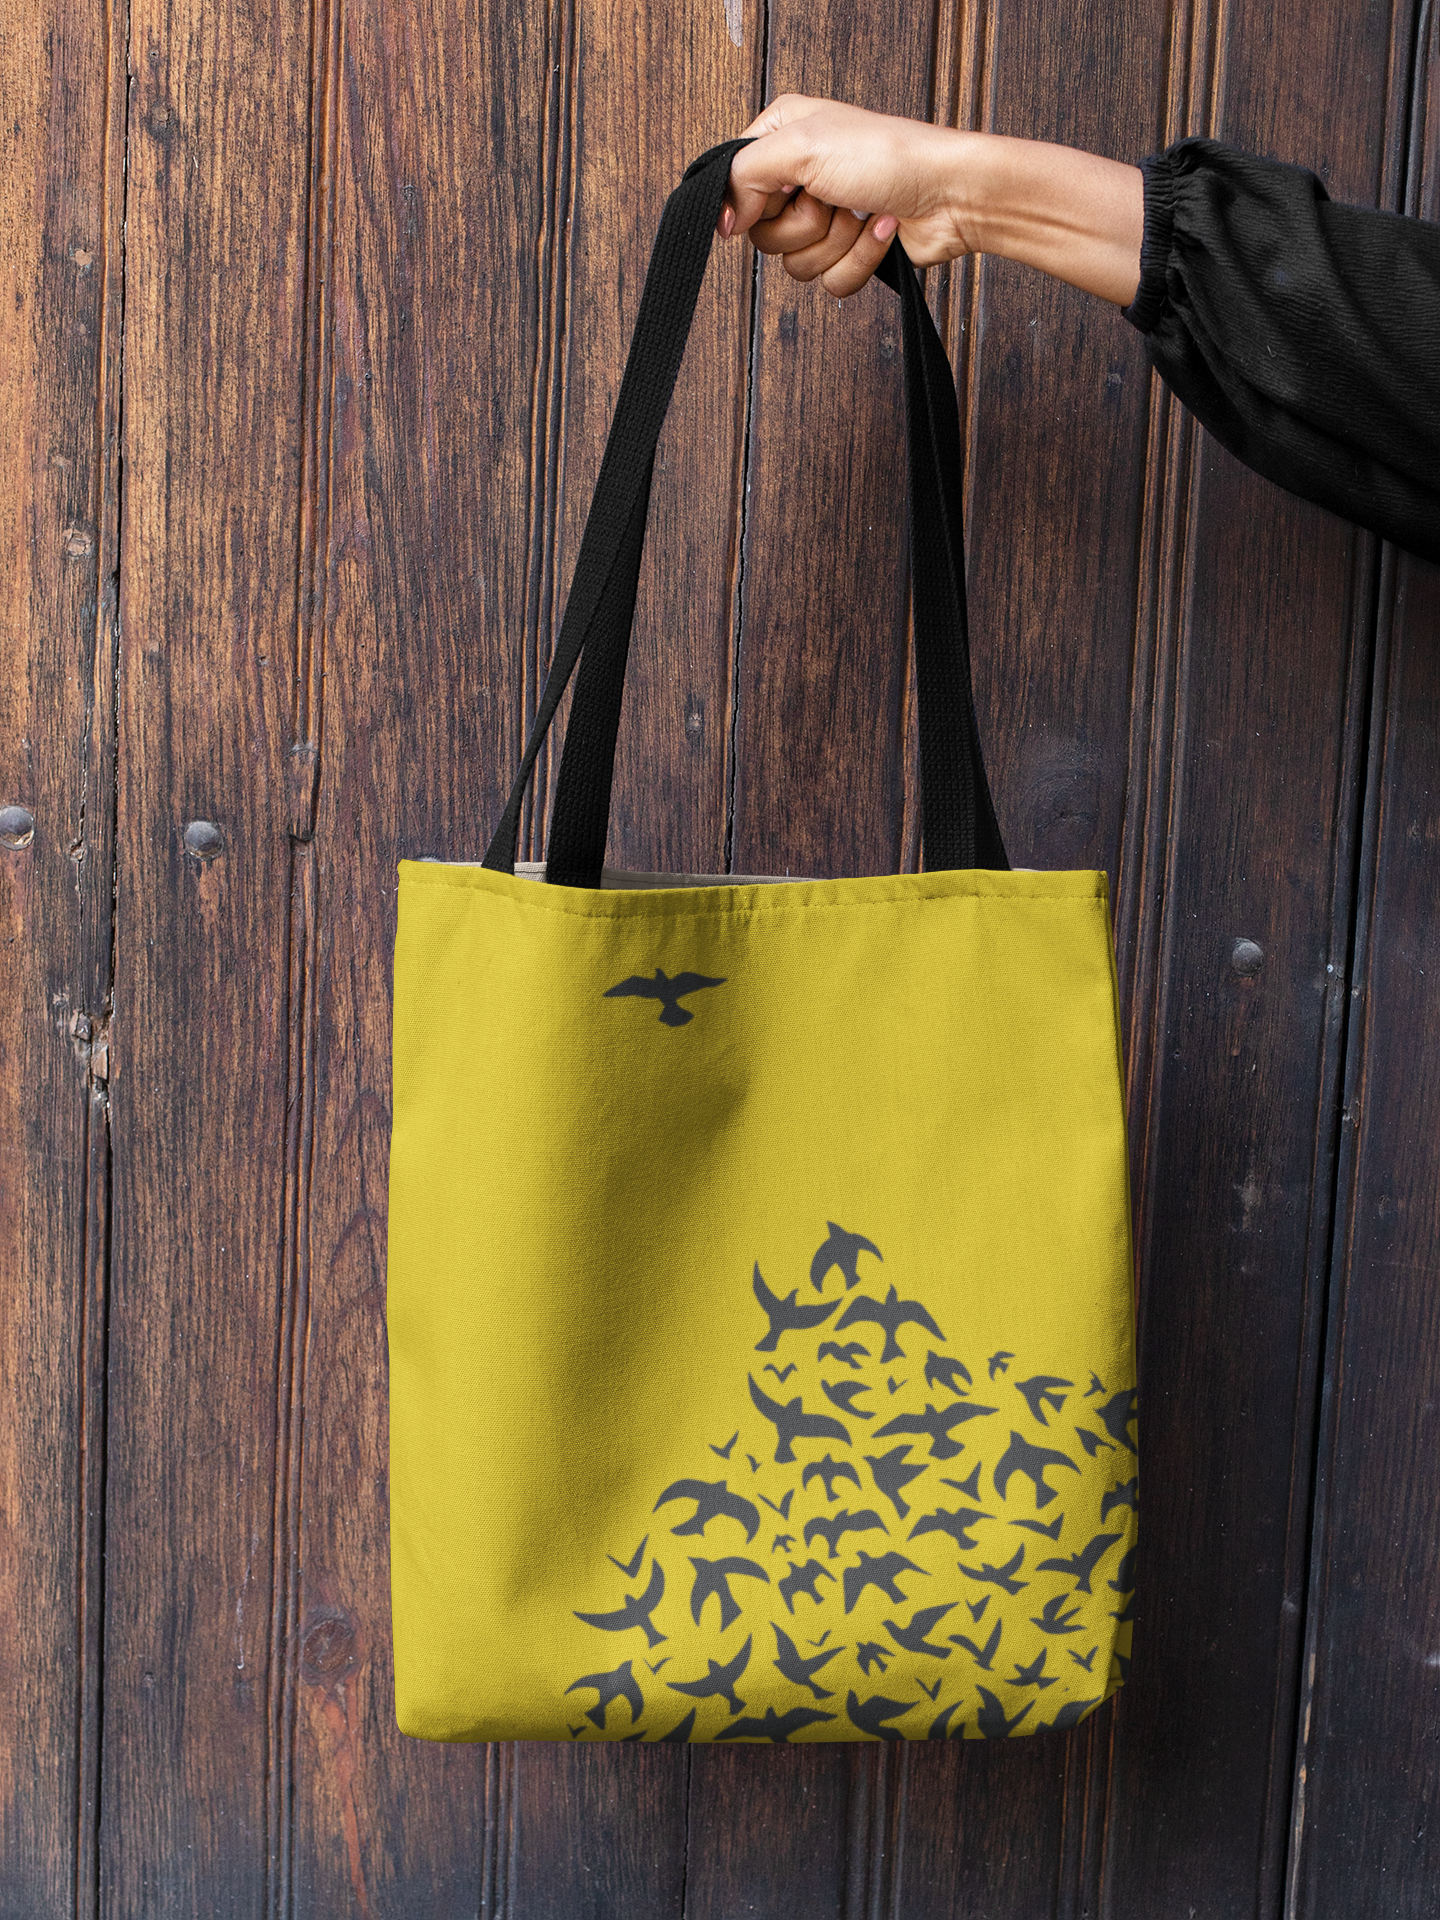 Creating Chaos Tote Bag - Second Chance Gifts